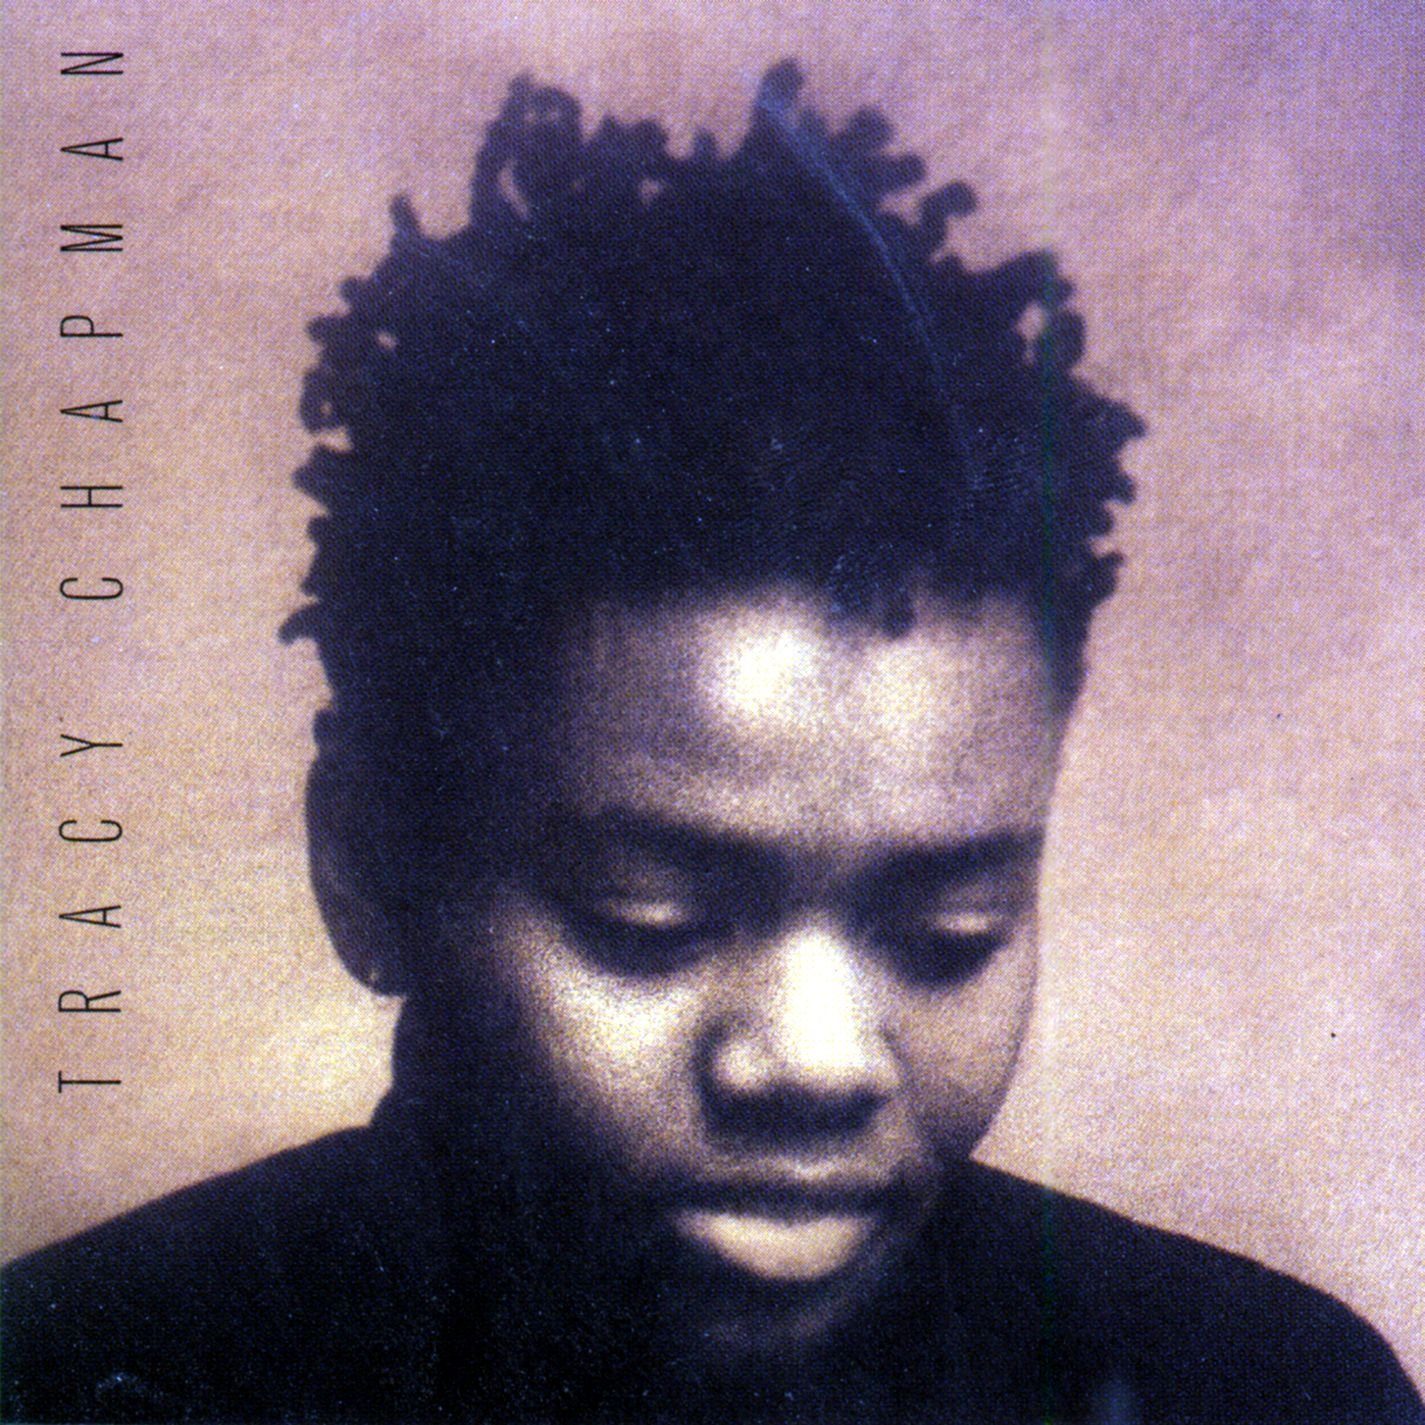 Tracy Chapman Will Become the First Black Woman to Have a Number One ...